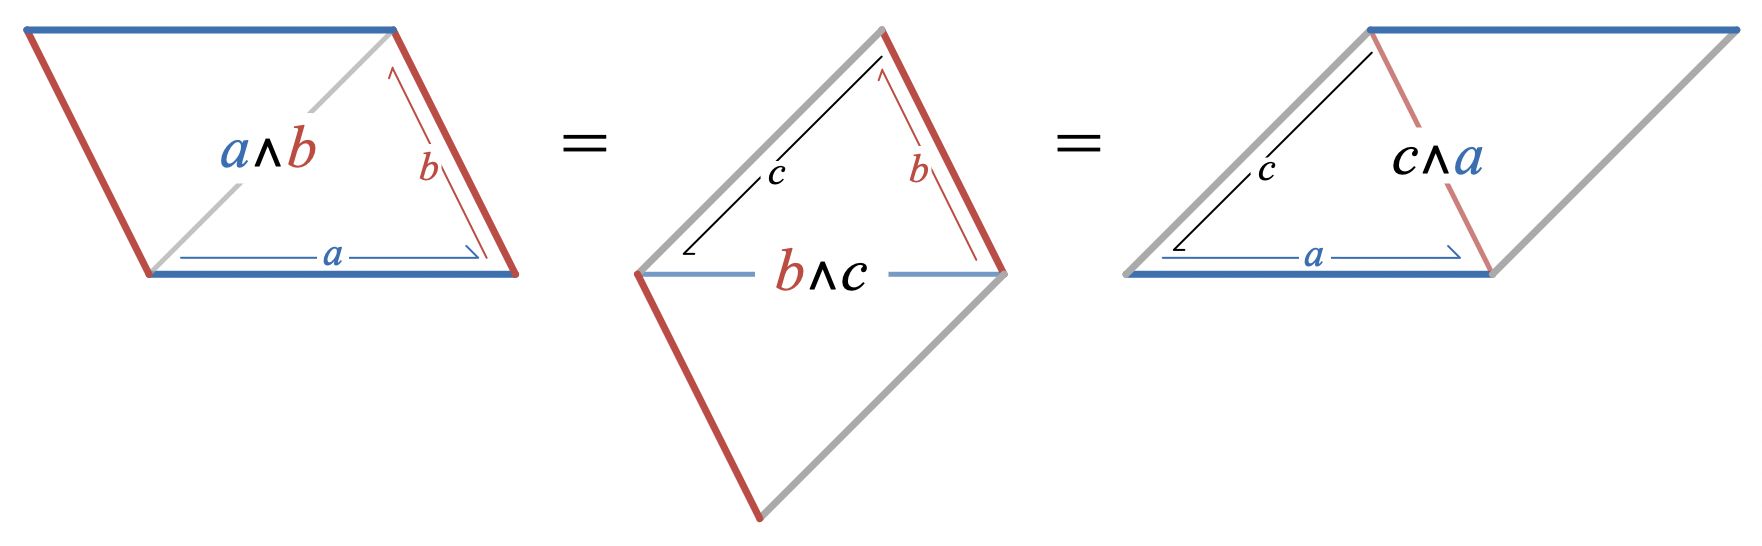 Equal-area parallelograms representing a wedge b, b wedge c, and c wedge a.